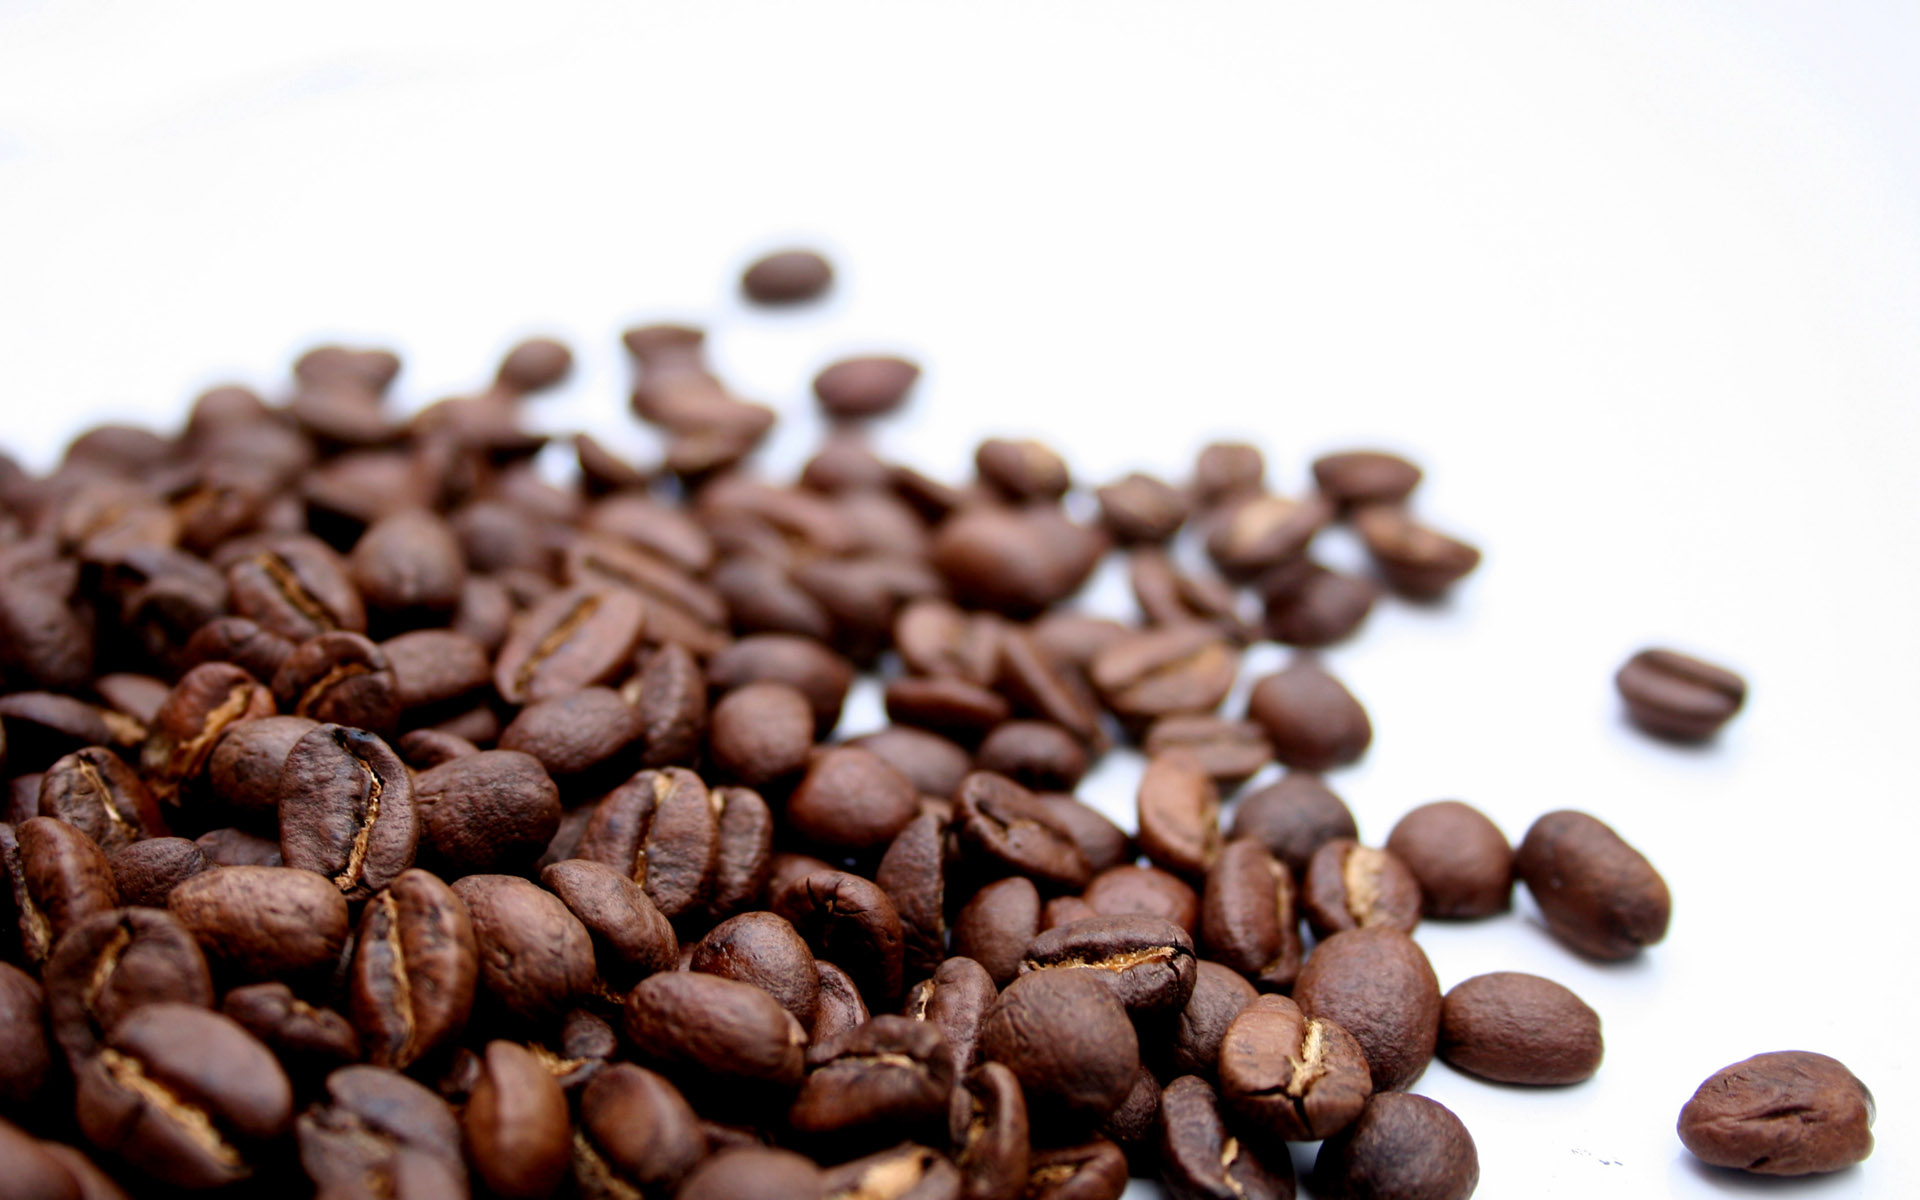 Coffee Beans 1920x1200 WIDE Image Photography 1920x1200